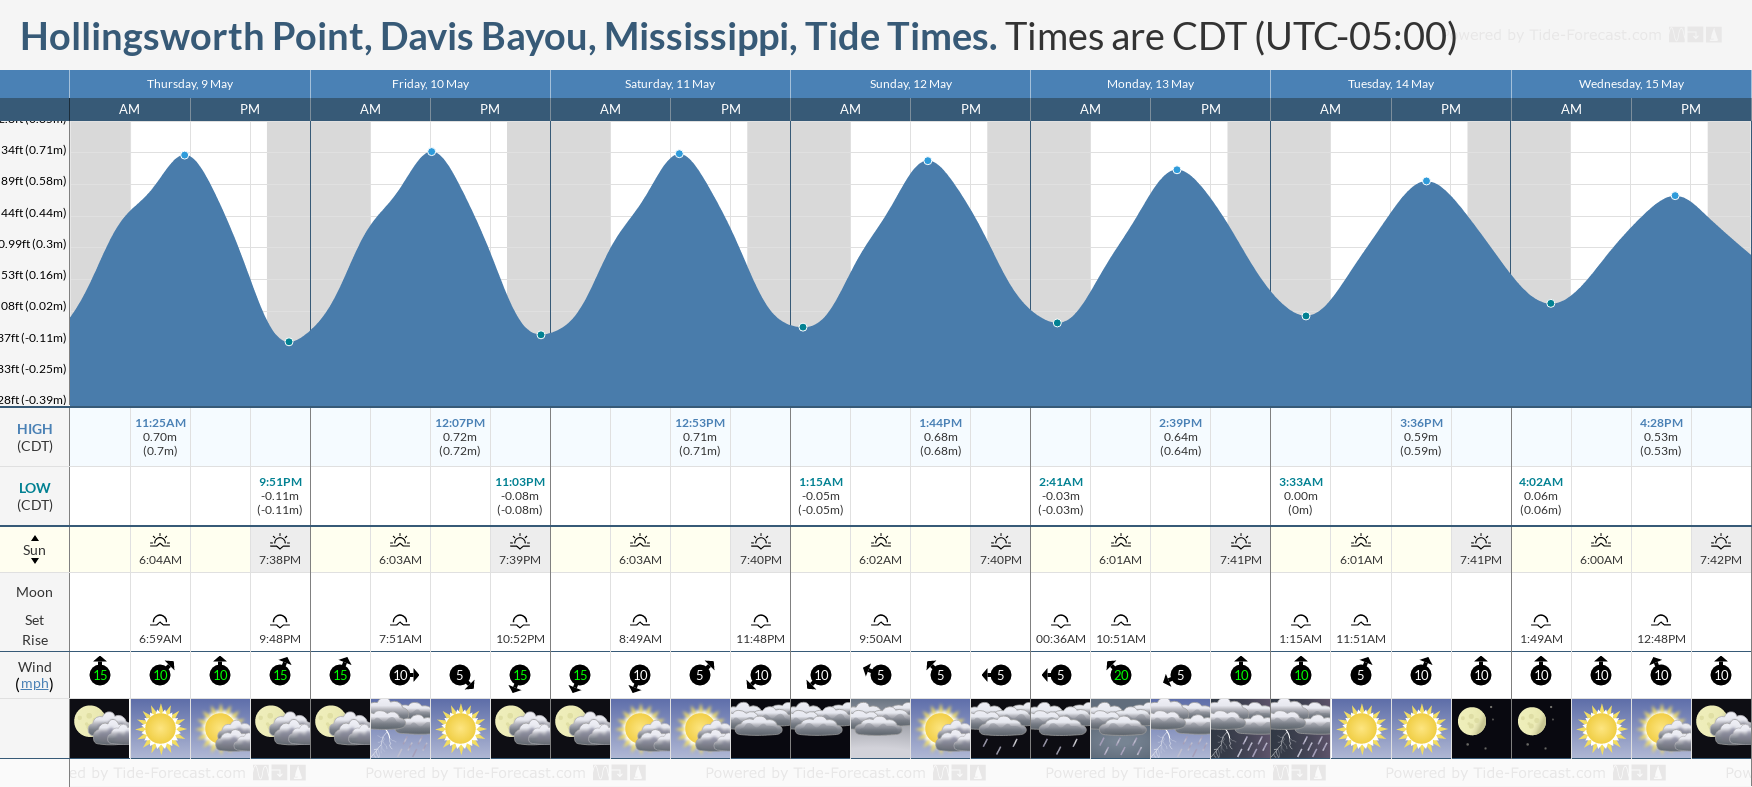 Hollingsworth Point, Davis Bayou, Mississippi Tide Chart including high and low tide tide times for the next 7 days